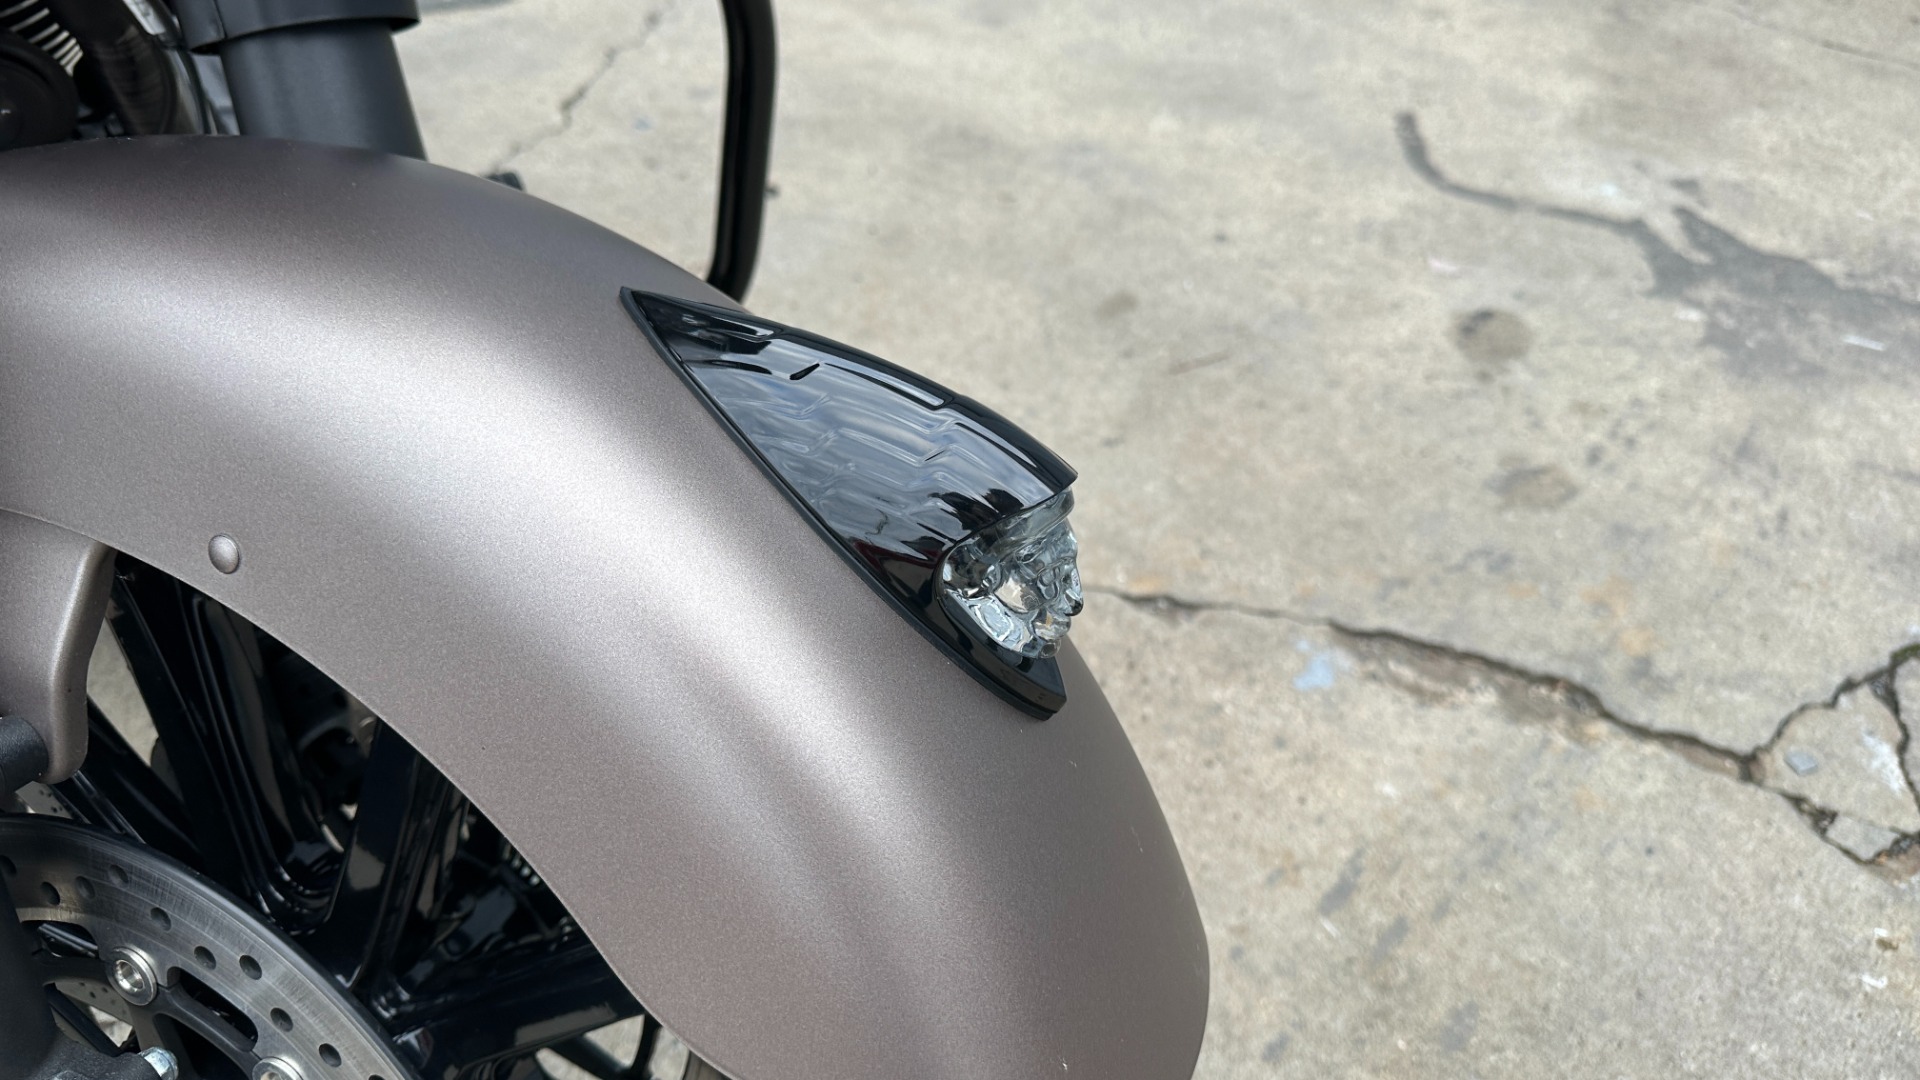 Used 2019 INDIAN CHIEFTAIN DARK HORSE / MATTE PAINT / LOW MILES / NAV / CRUISE CONTROL / TOUCHSCREEN for sale $23,999 at Formula Imports in Charlotte NC 28227 8